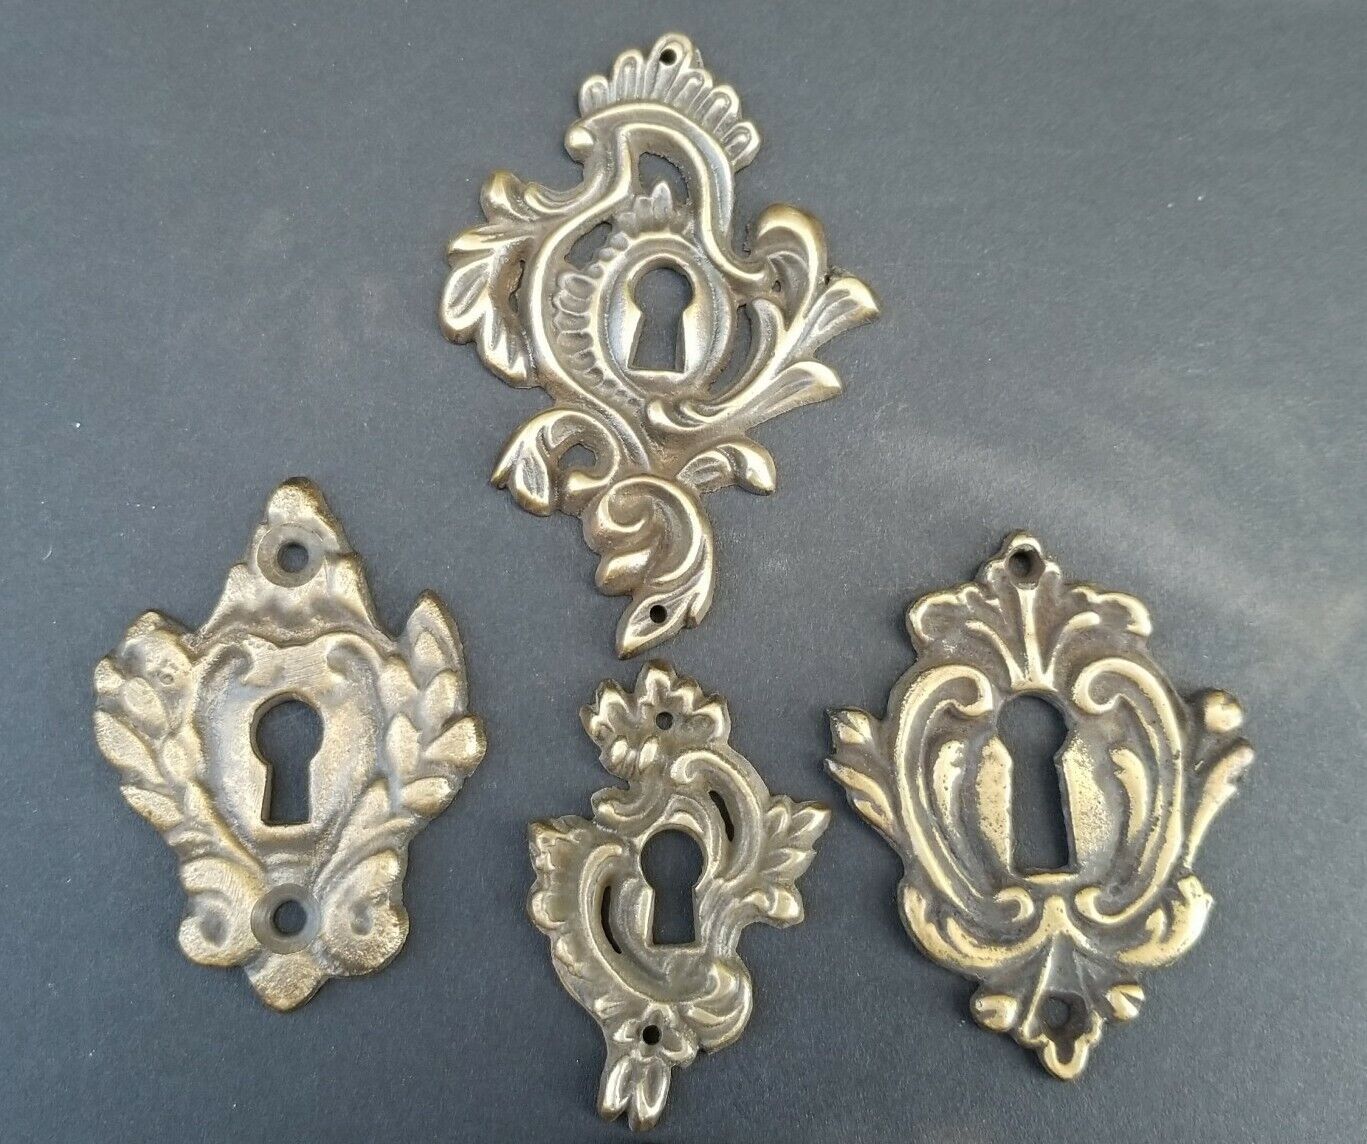 5 Various Antique Style Escutcheon Key Hole Covers Ornate 1-4" Solid Brass #E24